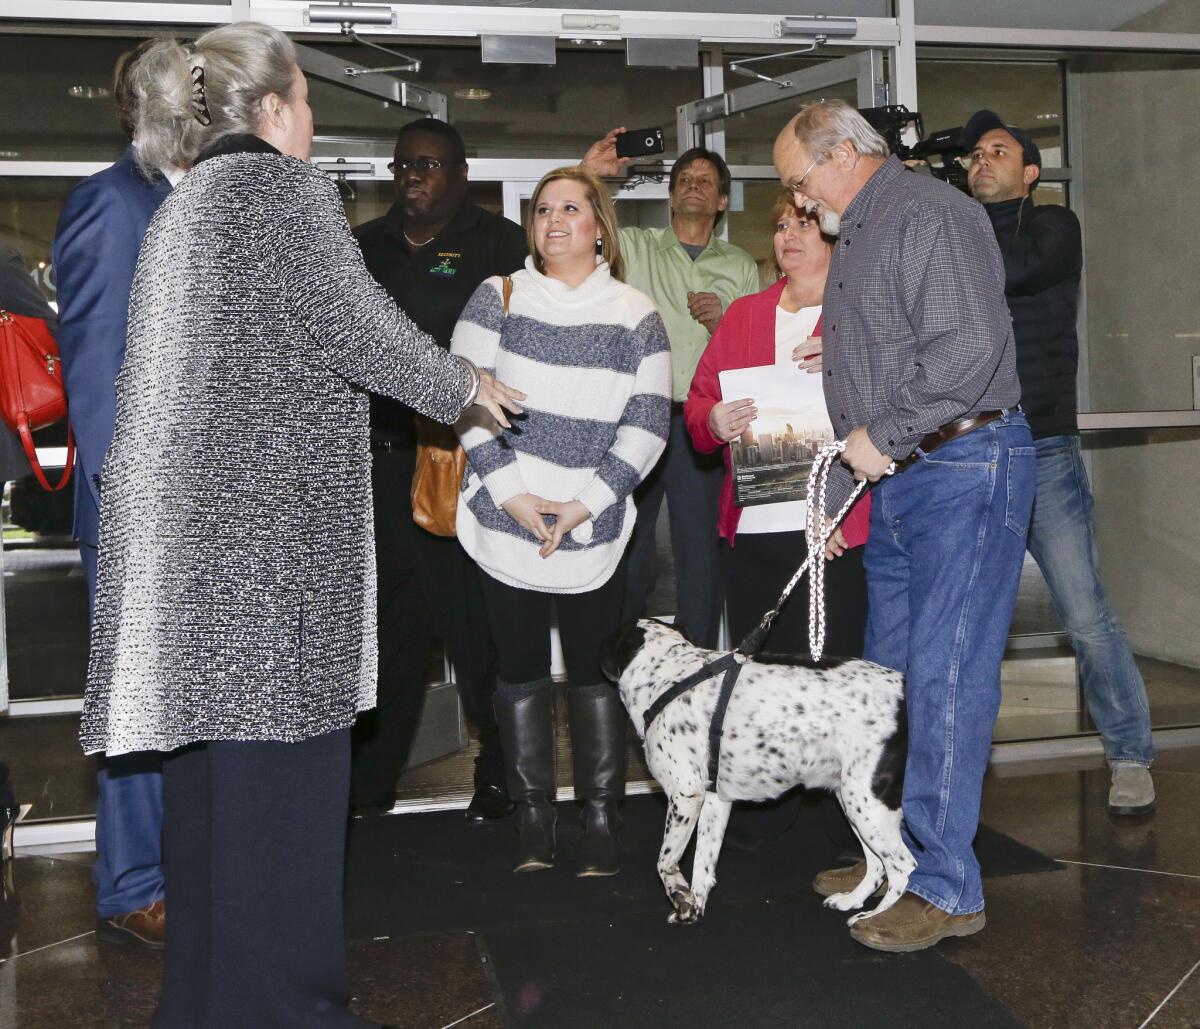 John Robinson, front right, arrives at the Tennessee Lottery headquarters in Nashville on Jan. 15 with his wife, Lisa; daughter, Tiffany, center, and family dog on Jan. 15.